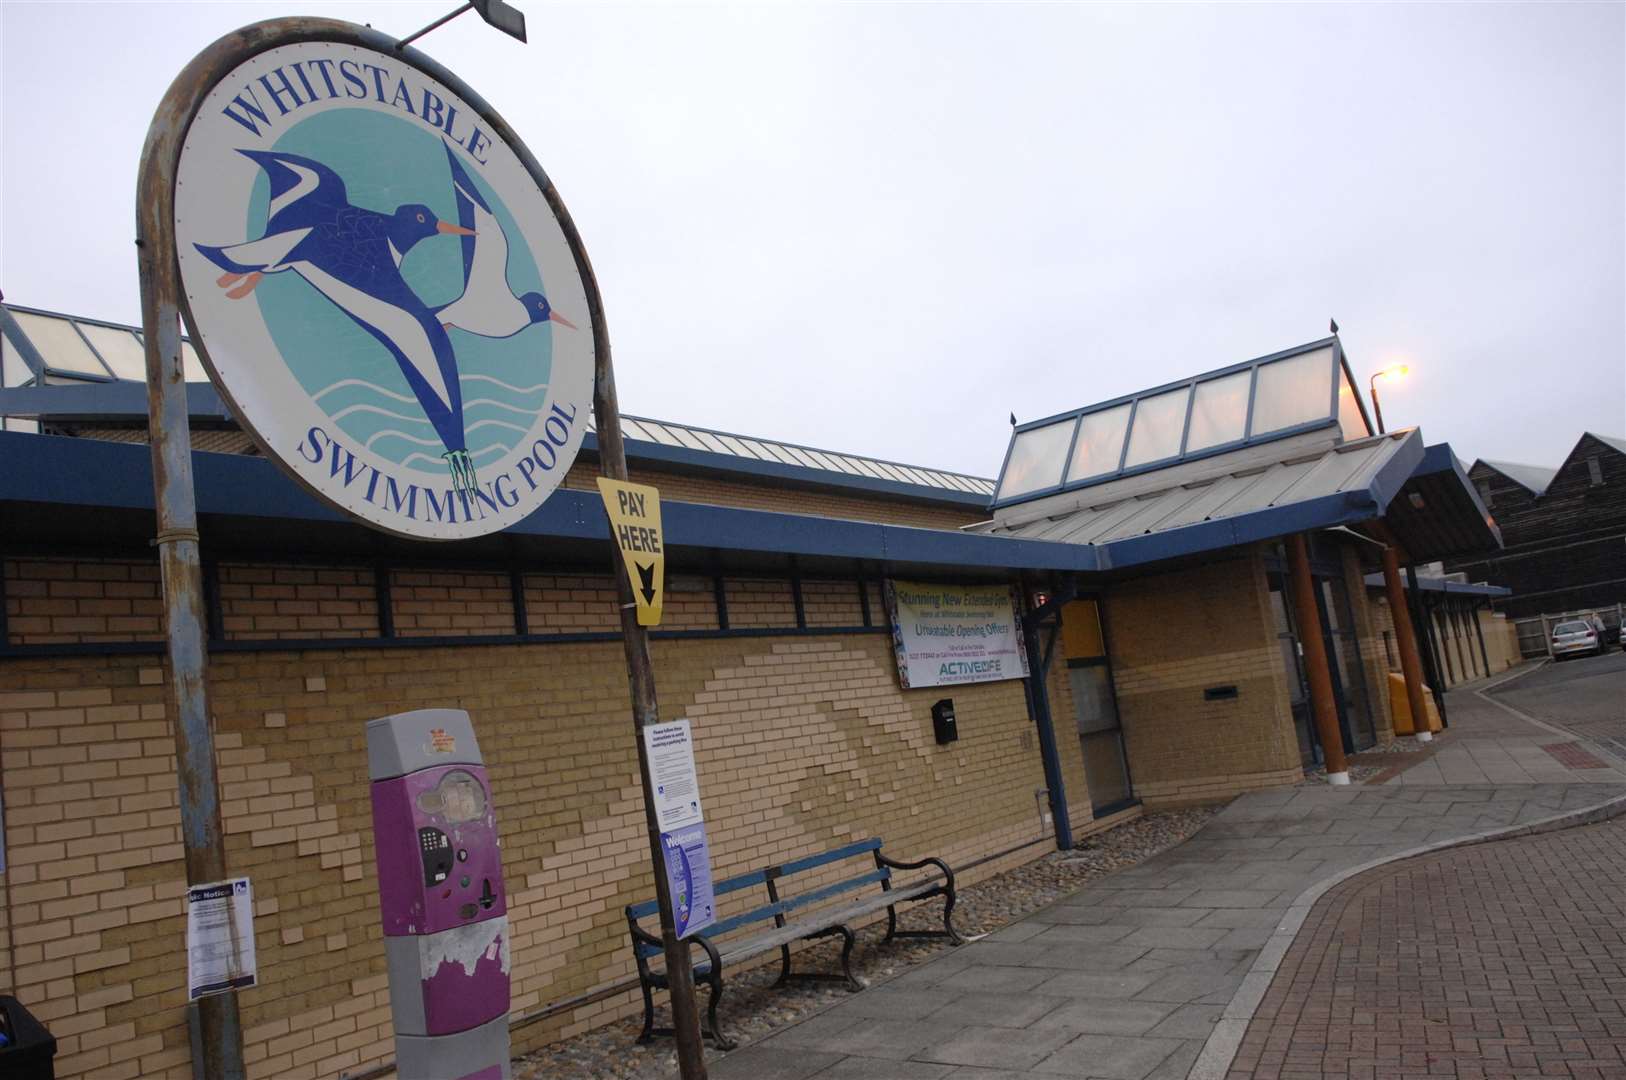 The Whitstable Swimming Pool will be welcoming back users - along with the sports centre. Picture: Chris Davey